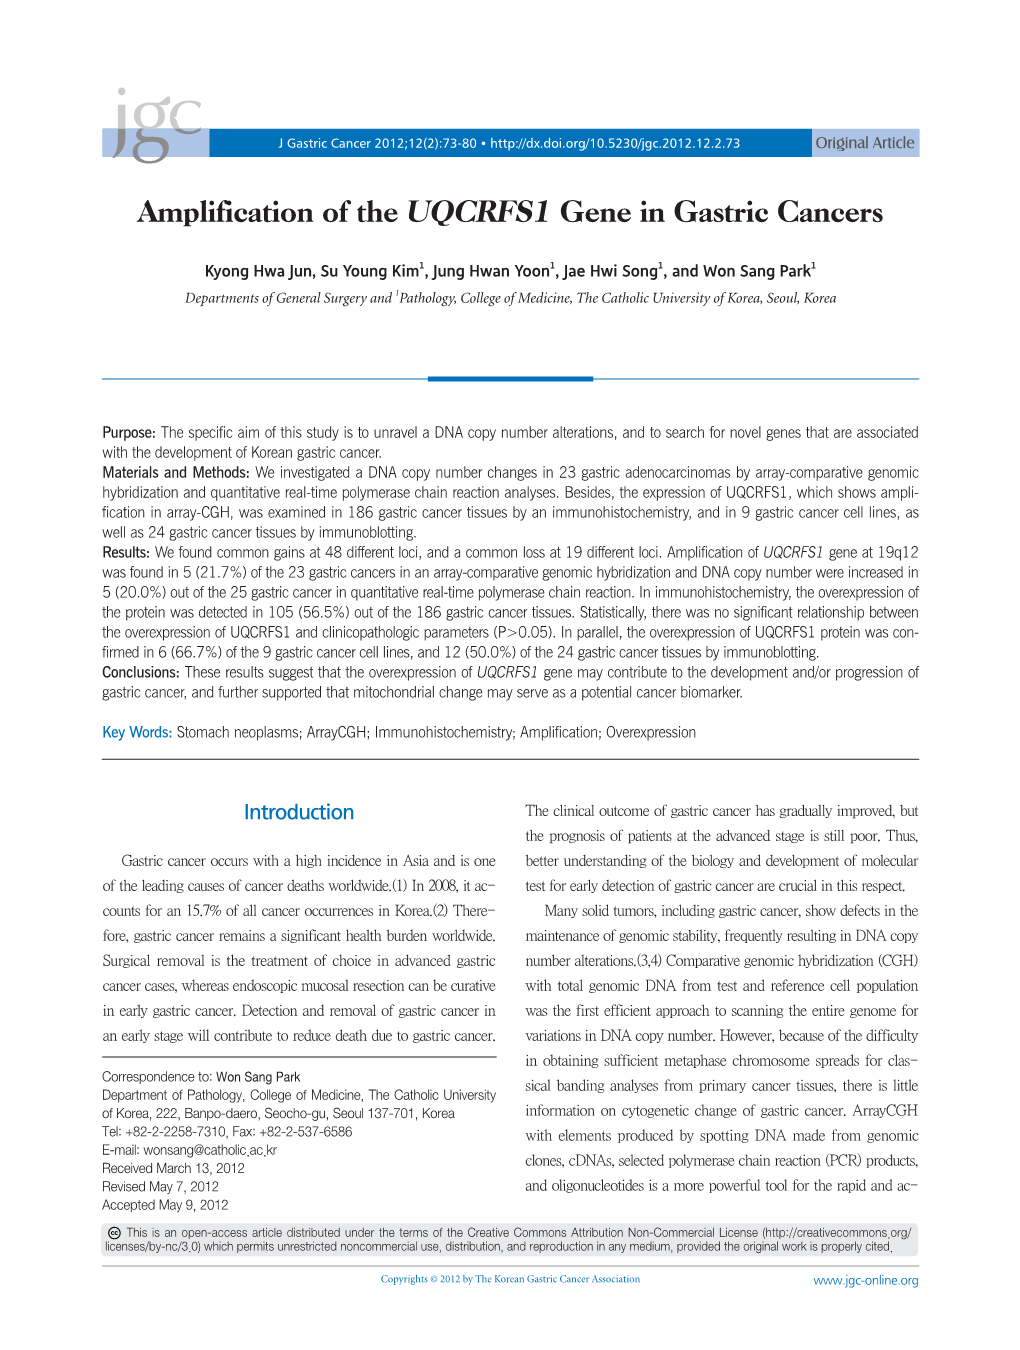 Amplification of the UQCRFS1 Gene in Gastric Cancers